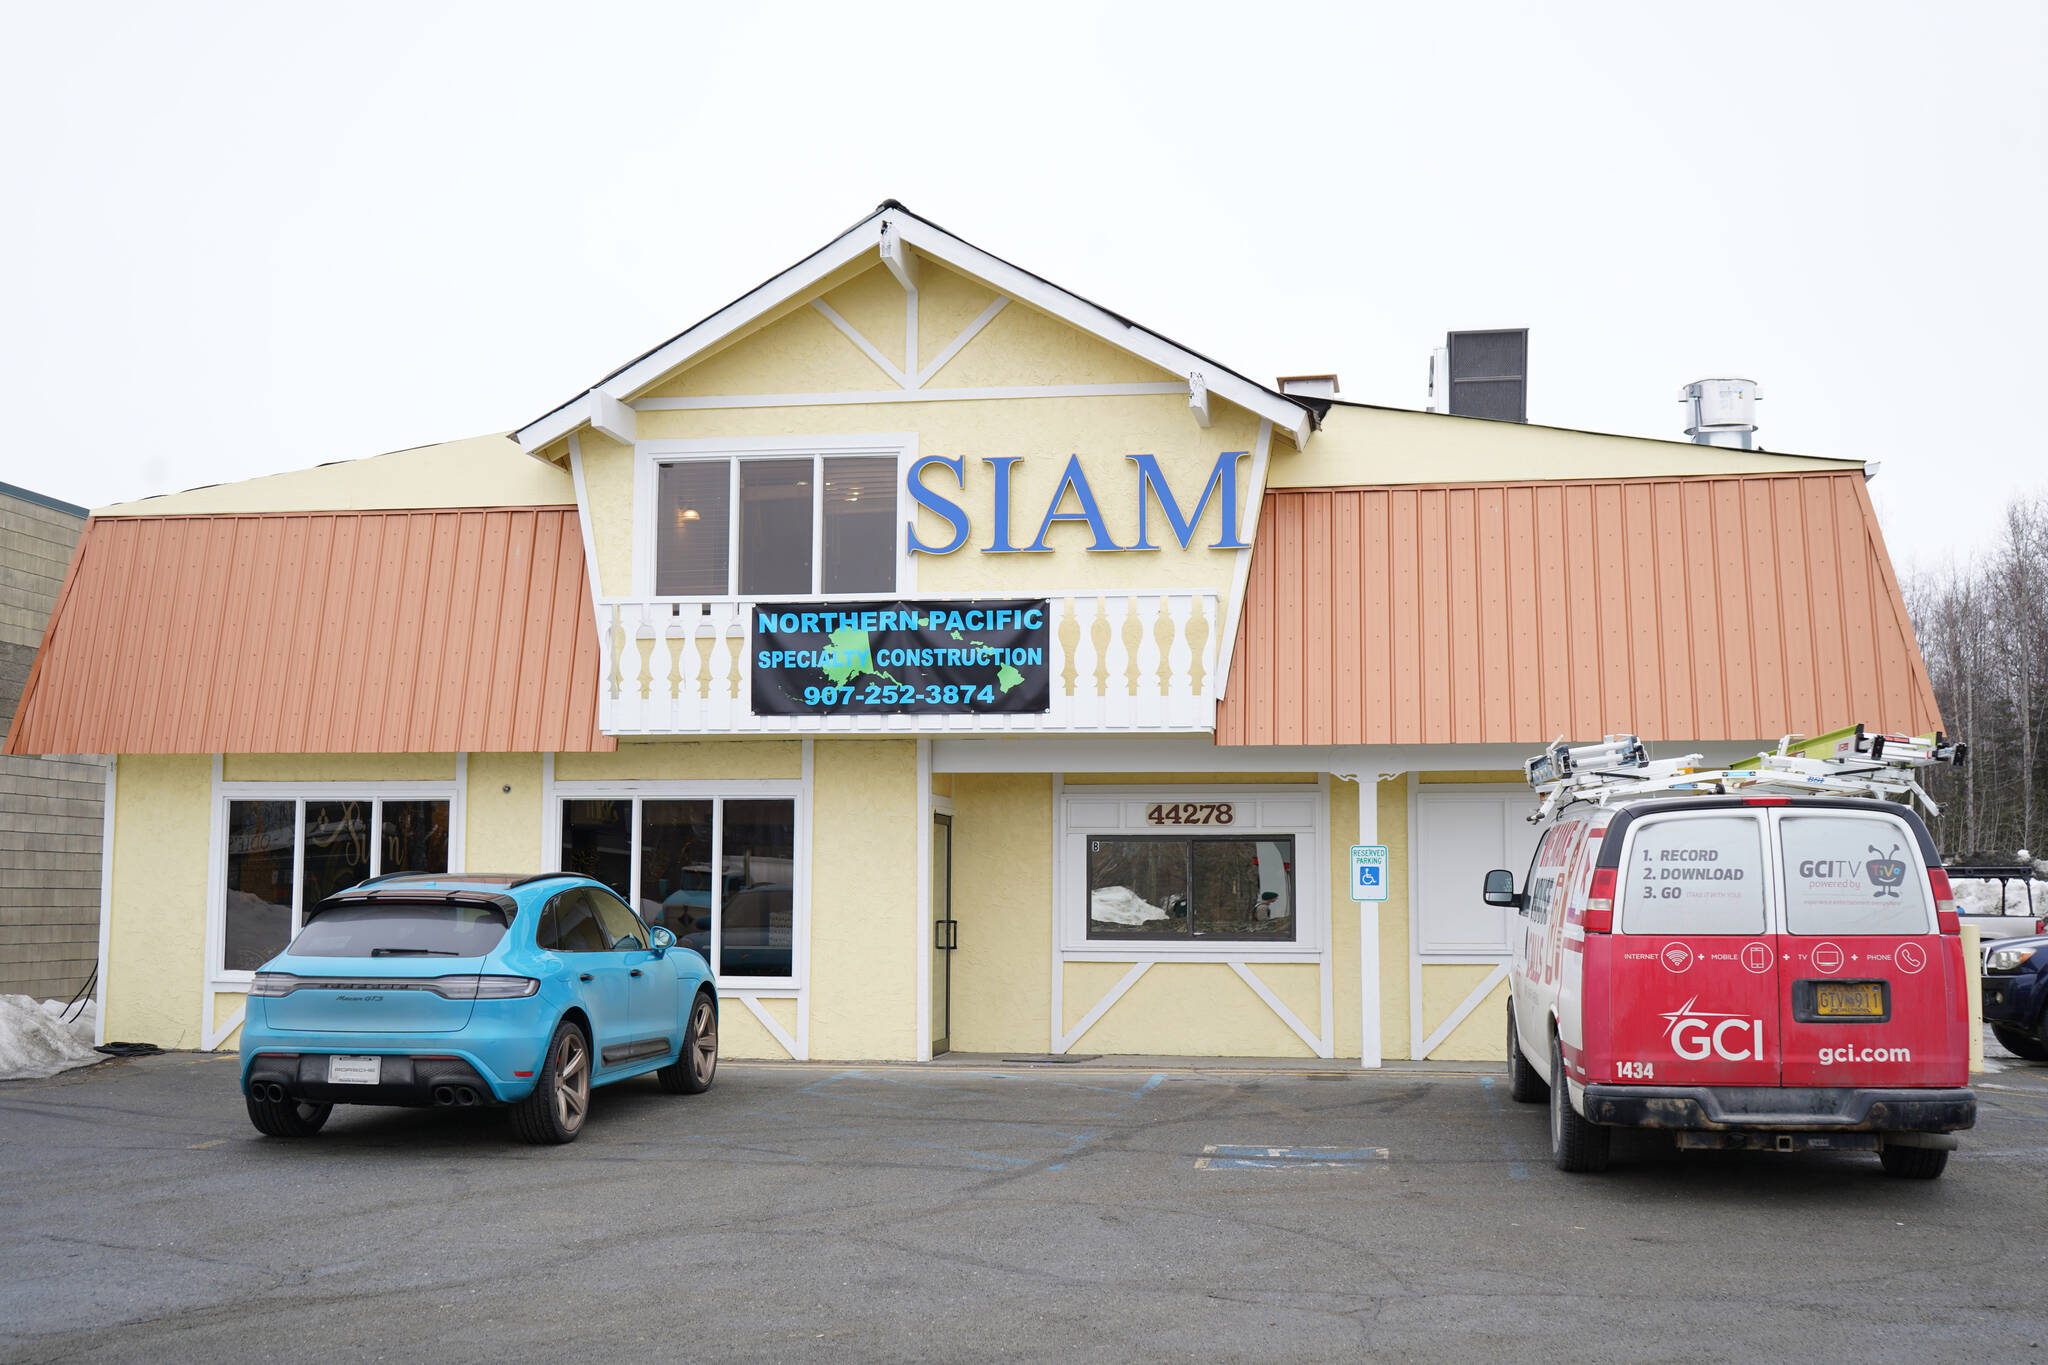 The exterior of the new Siam Noodles and Food location in Soldotna, Alaska is seen on Tuesday, March 28, 2023. (Jake Dye/Peninsula Clarion)